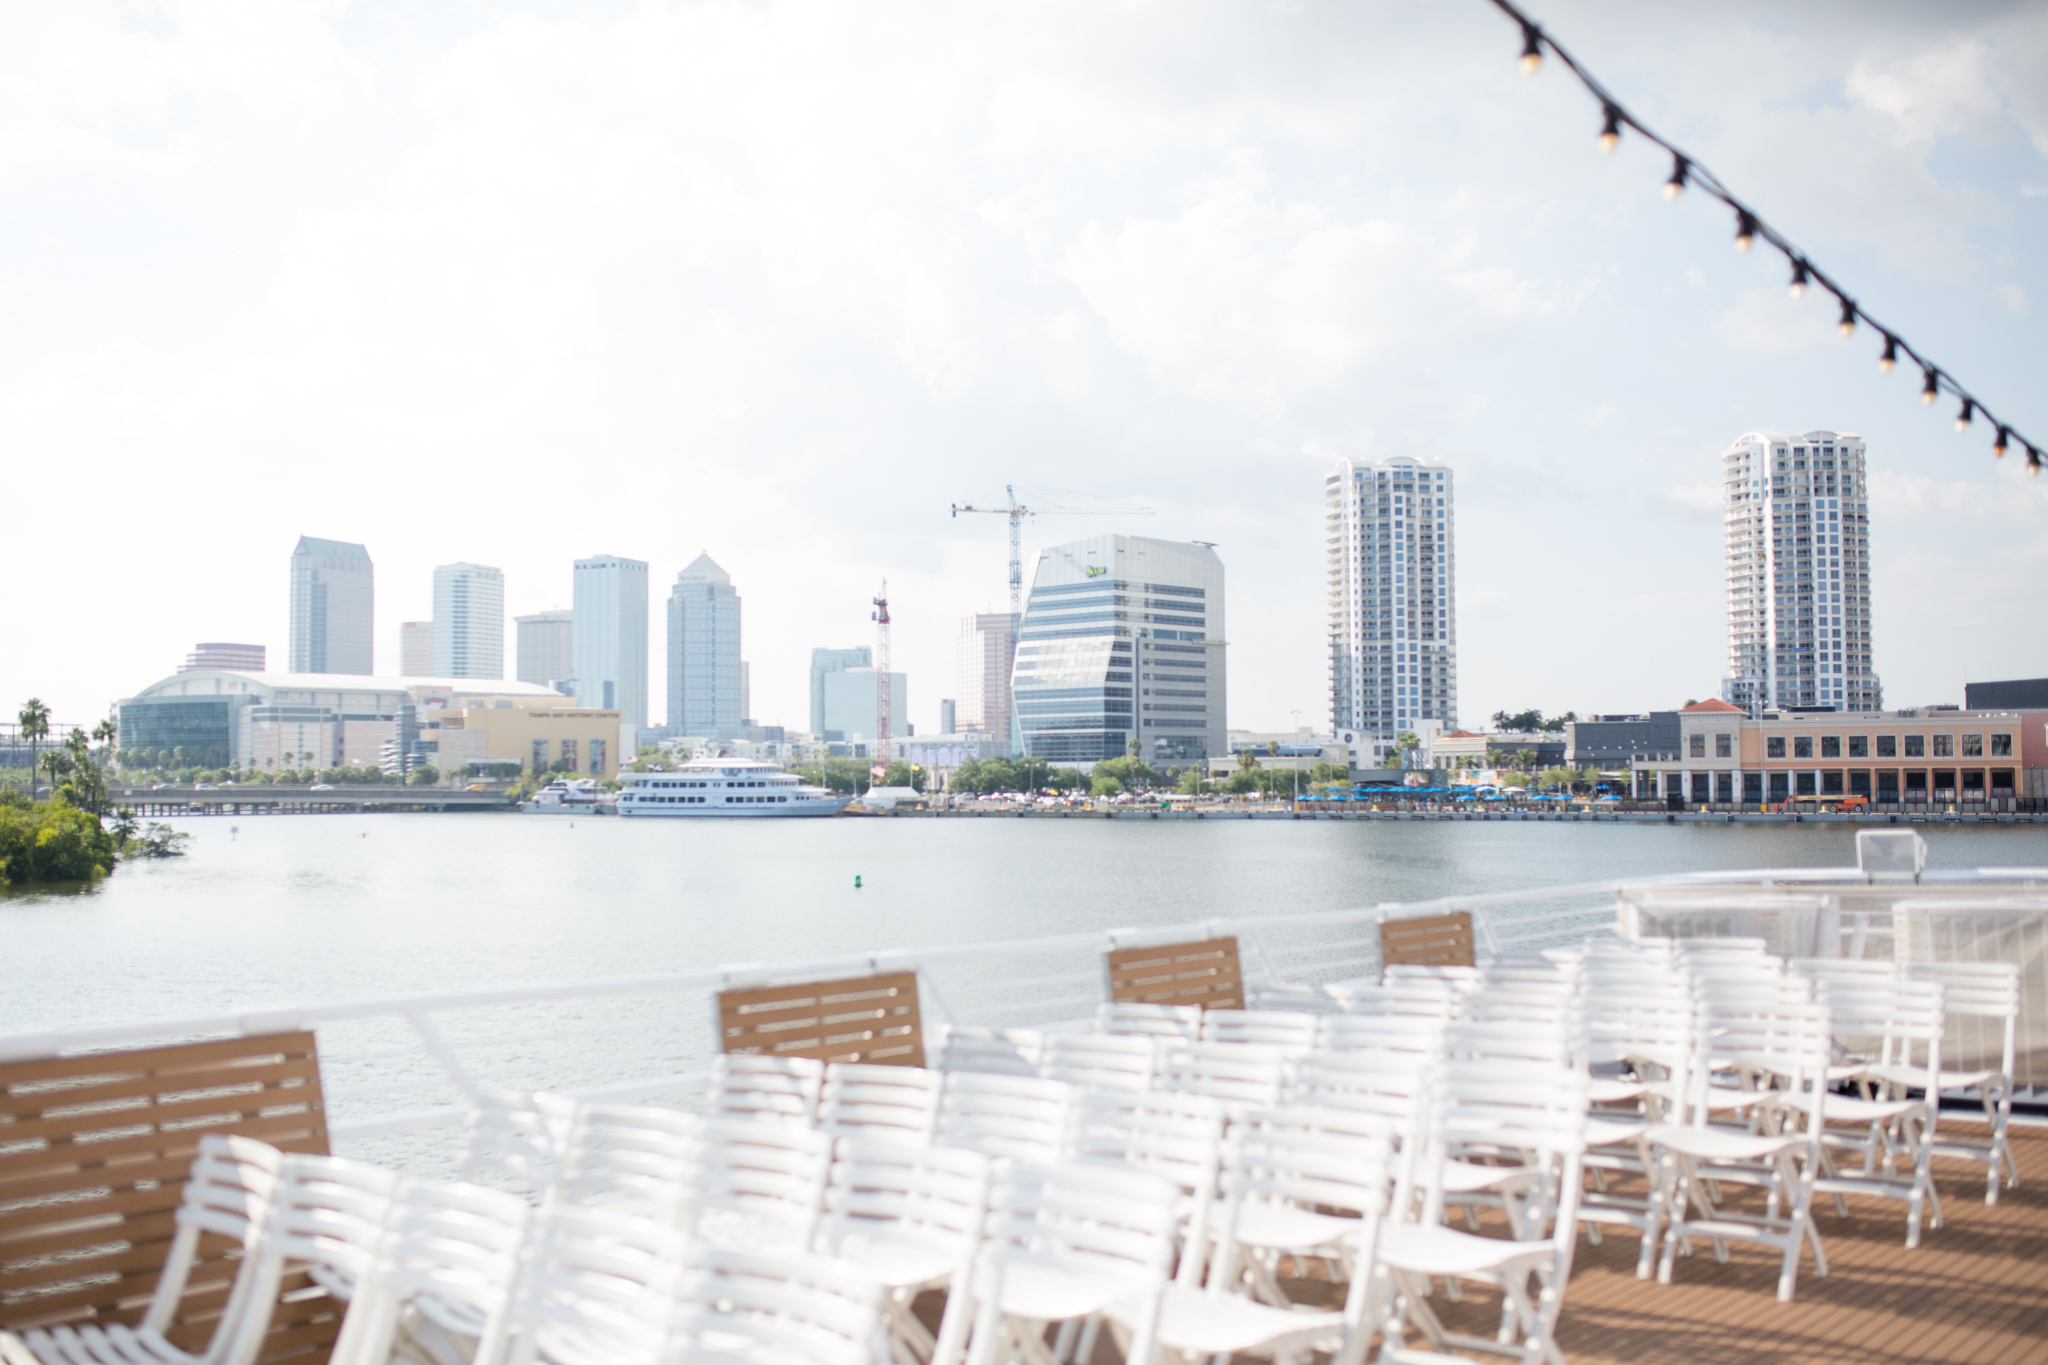 Tampa bay from wedding yacht.